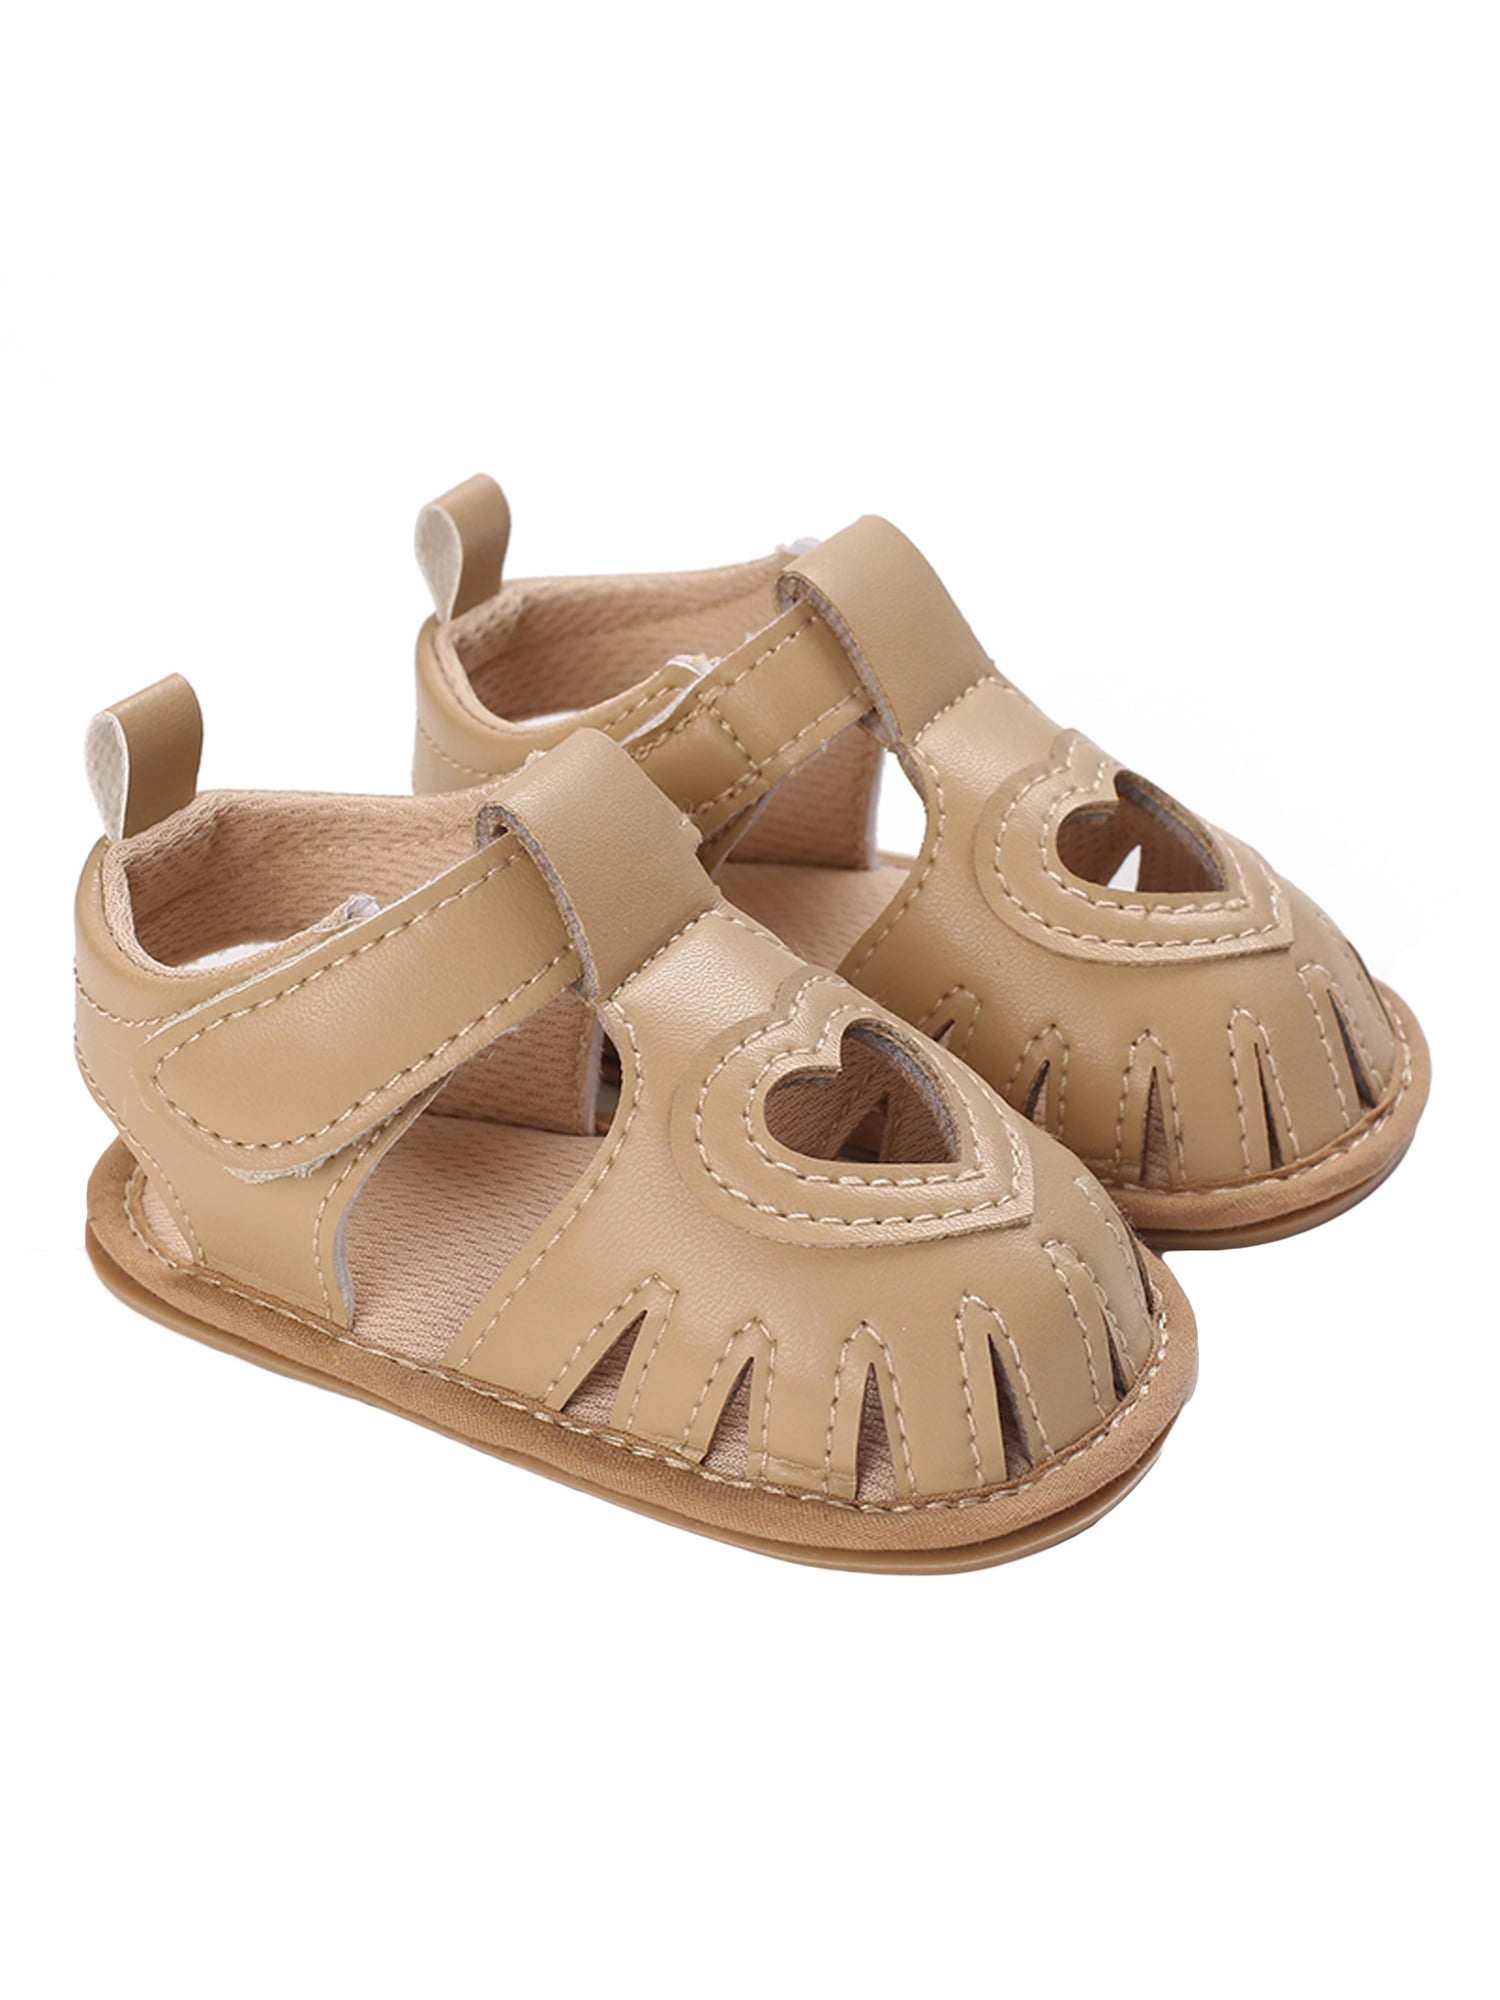 Child Baby Girls Summer Woven Sandals Sneaker Anti-slip Soft Sole Infant Shoes 